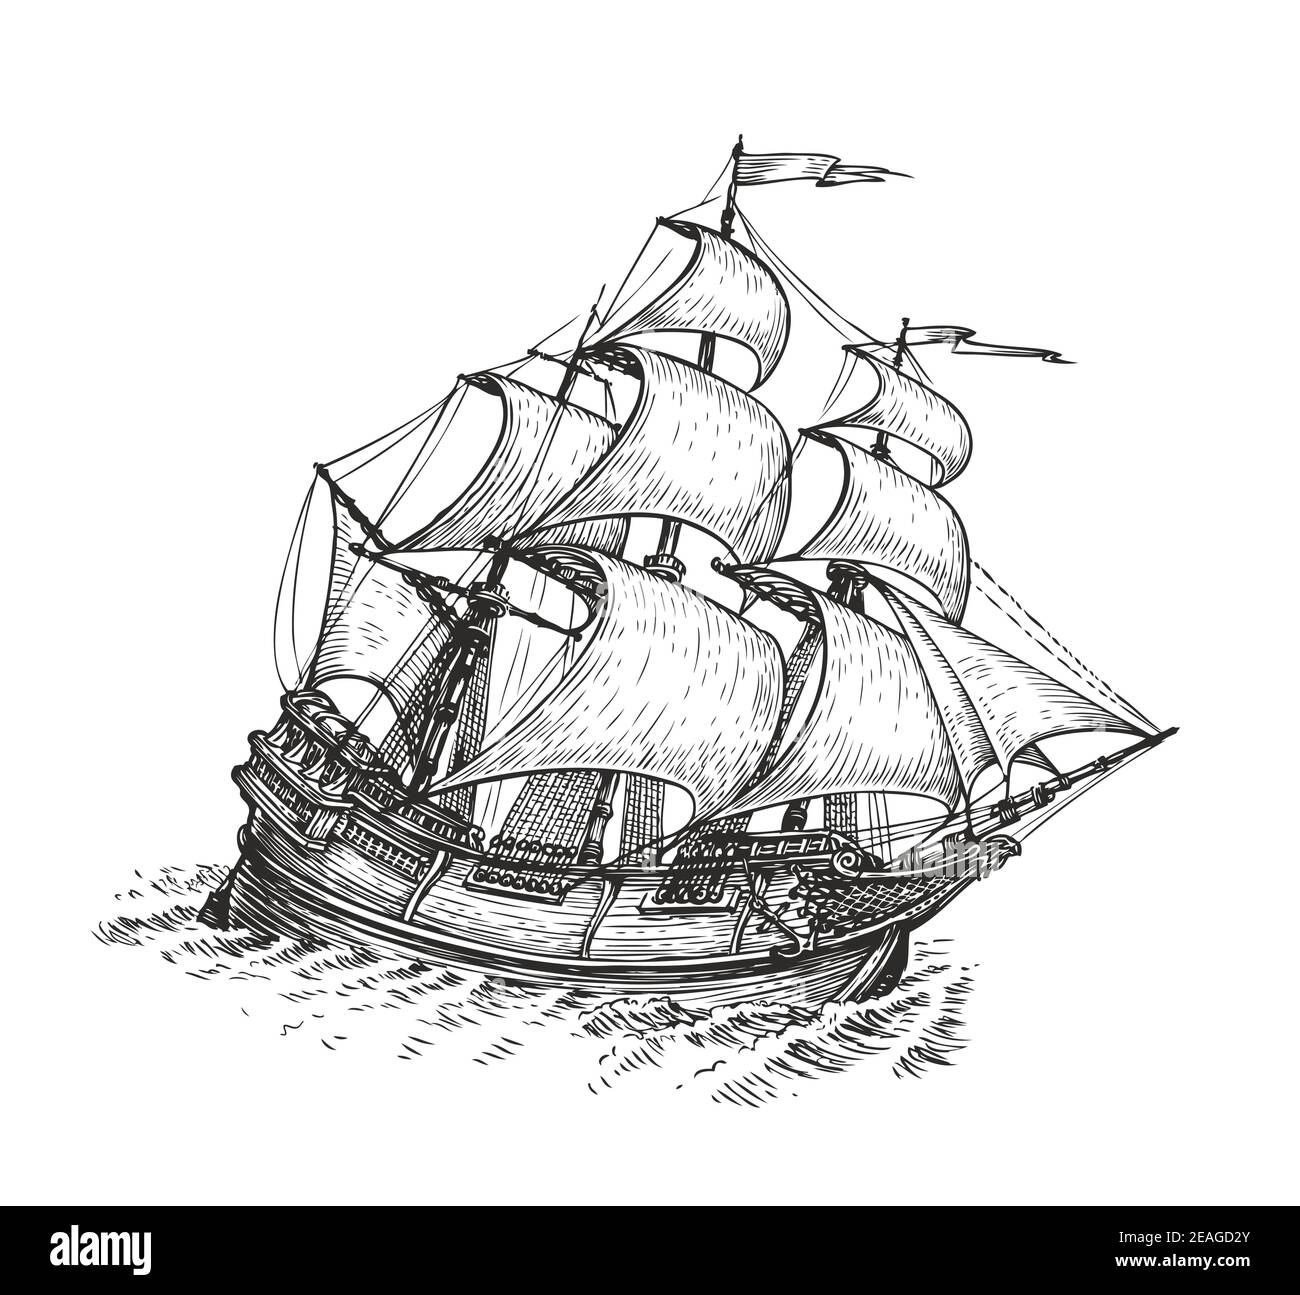 How to draw a pirate ship  Step by step Drawing tutorials